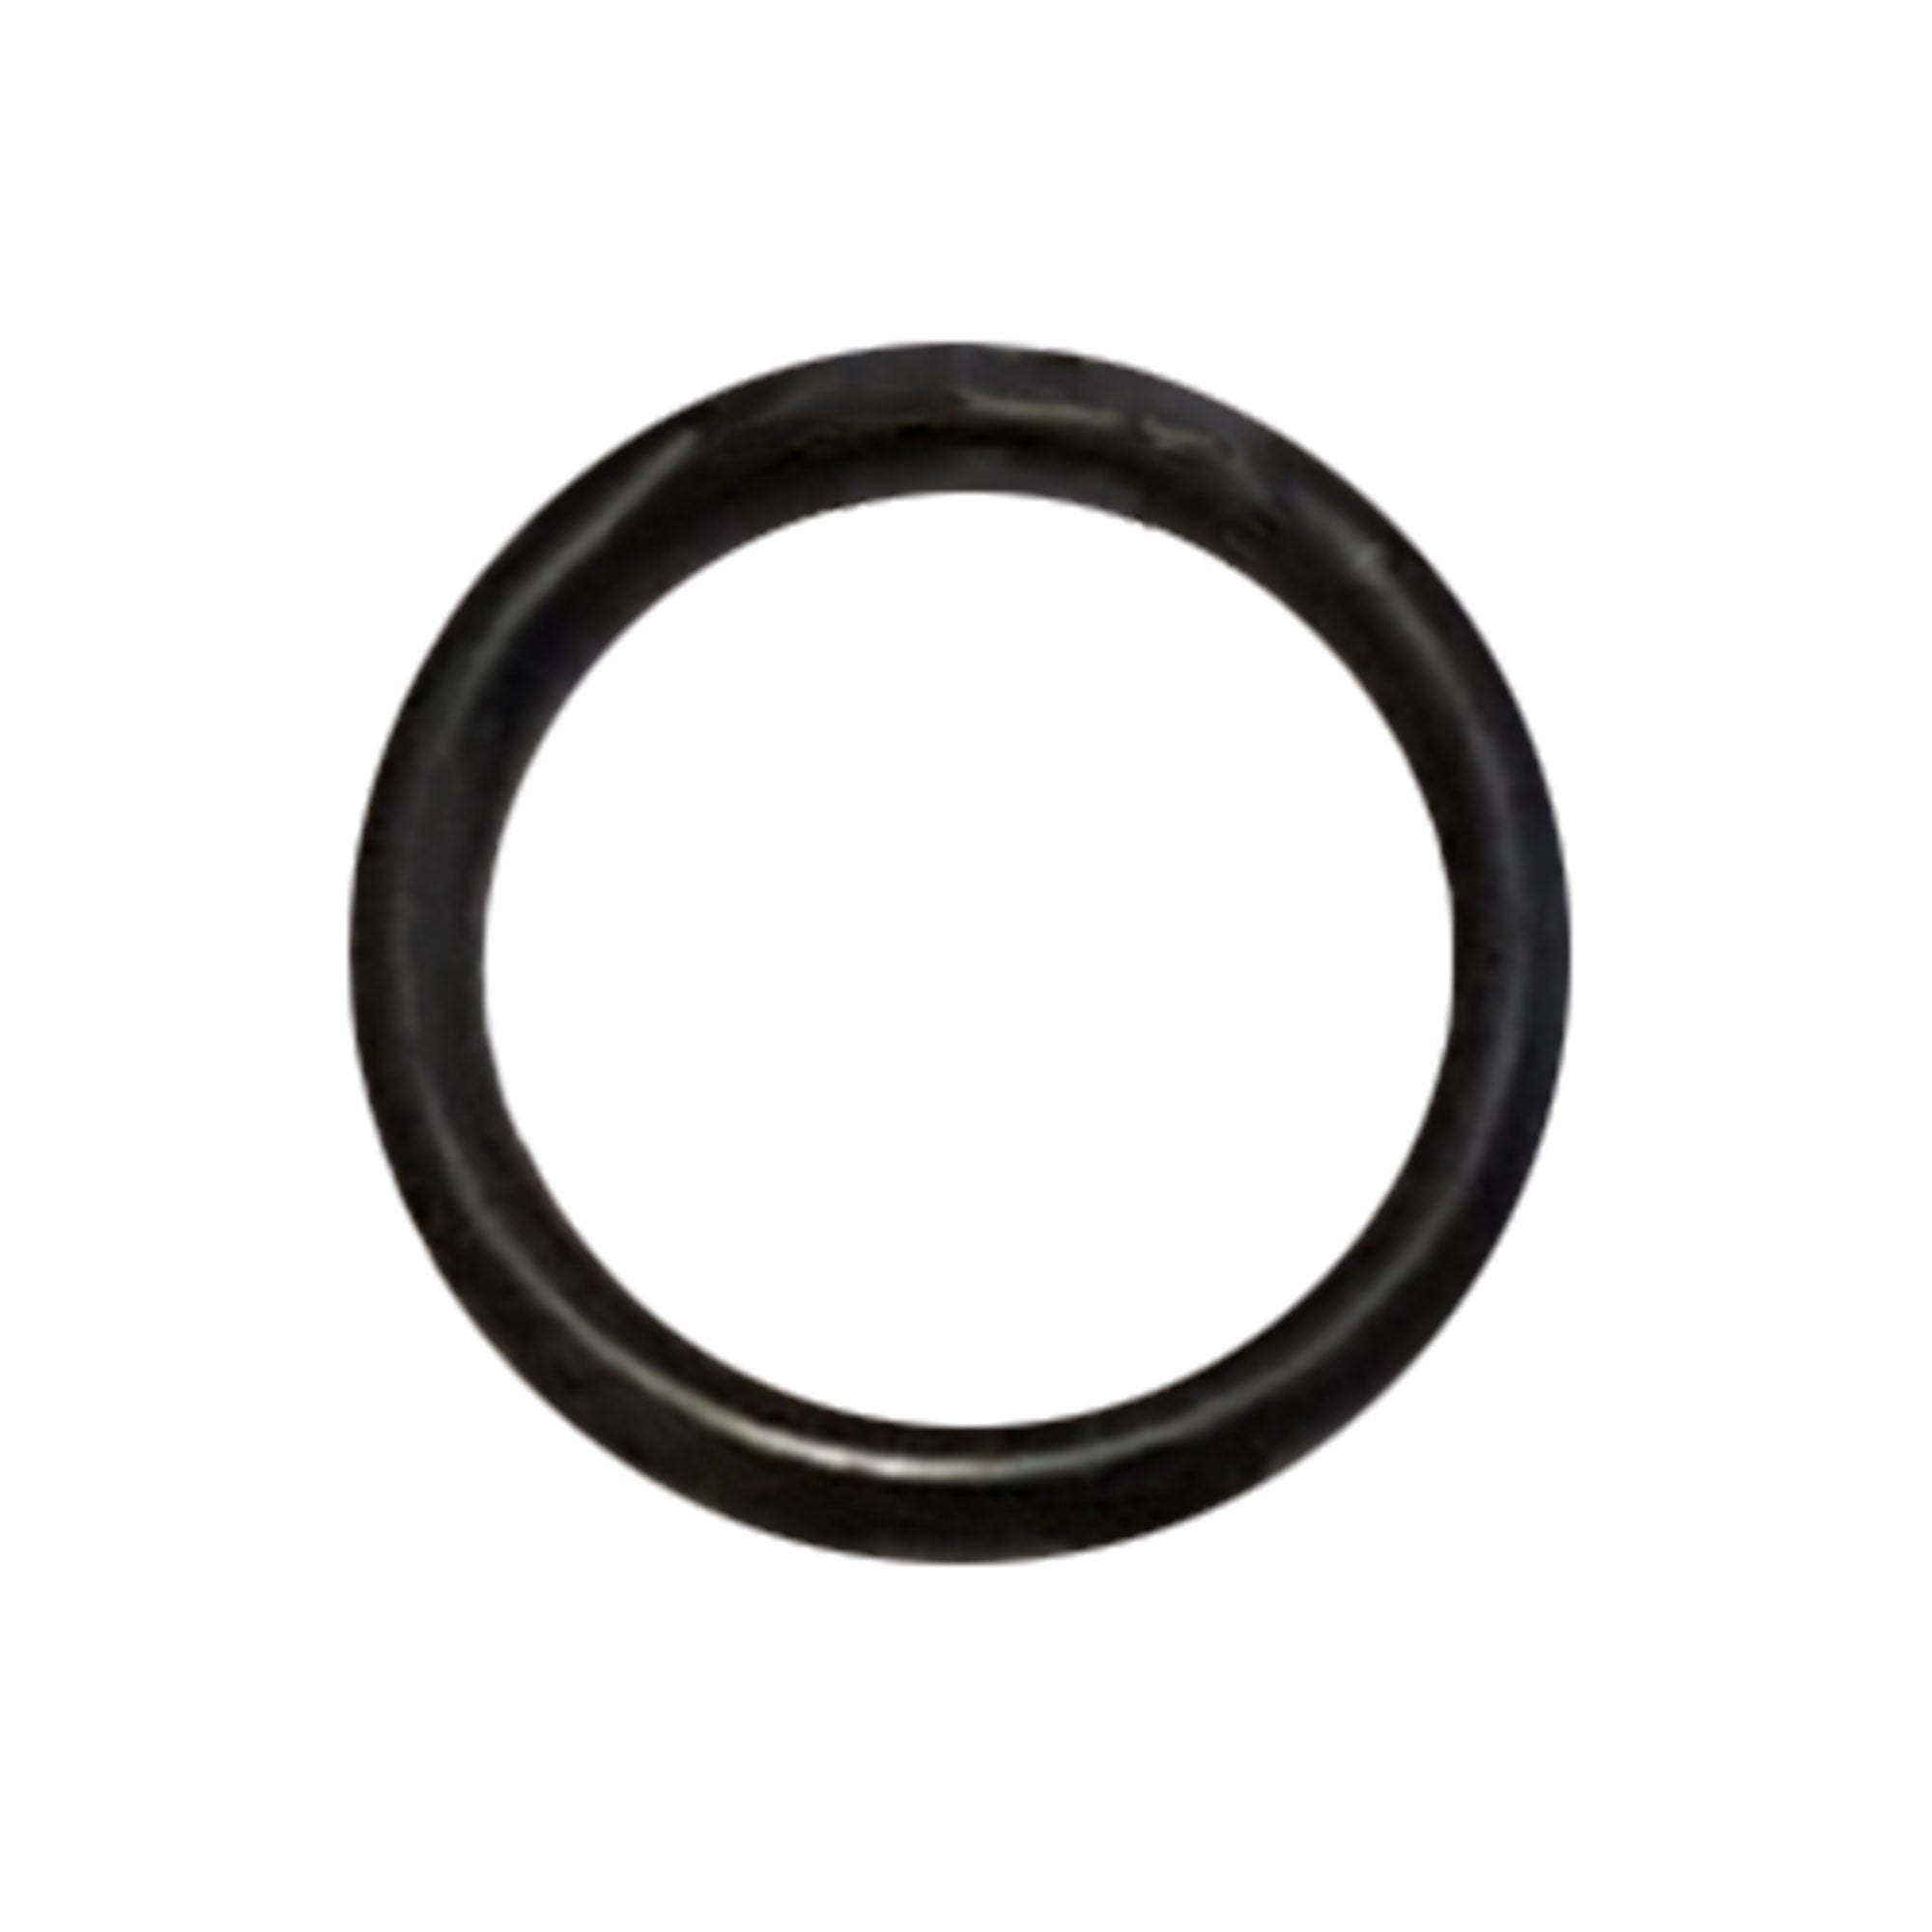 256469 - O-Ring, Pack of 6 - PURspray